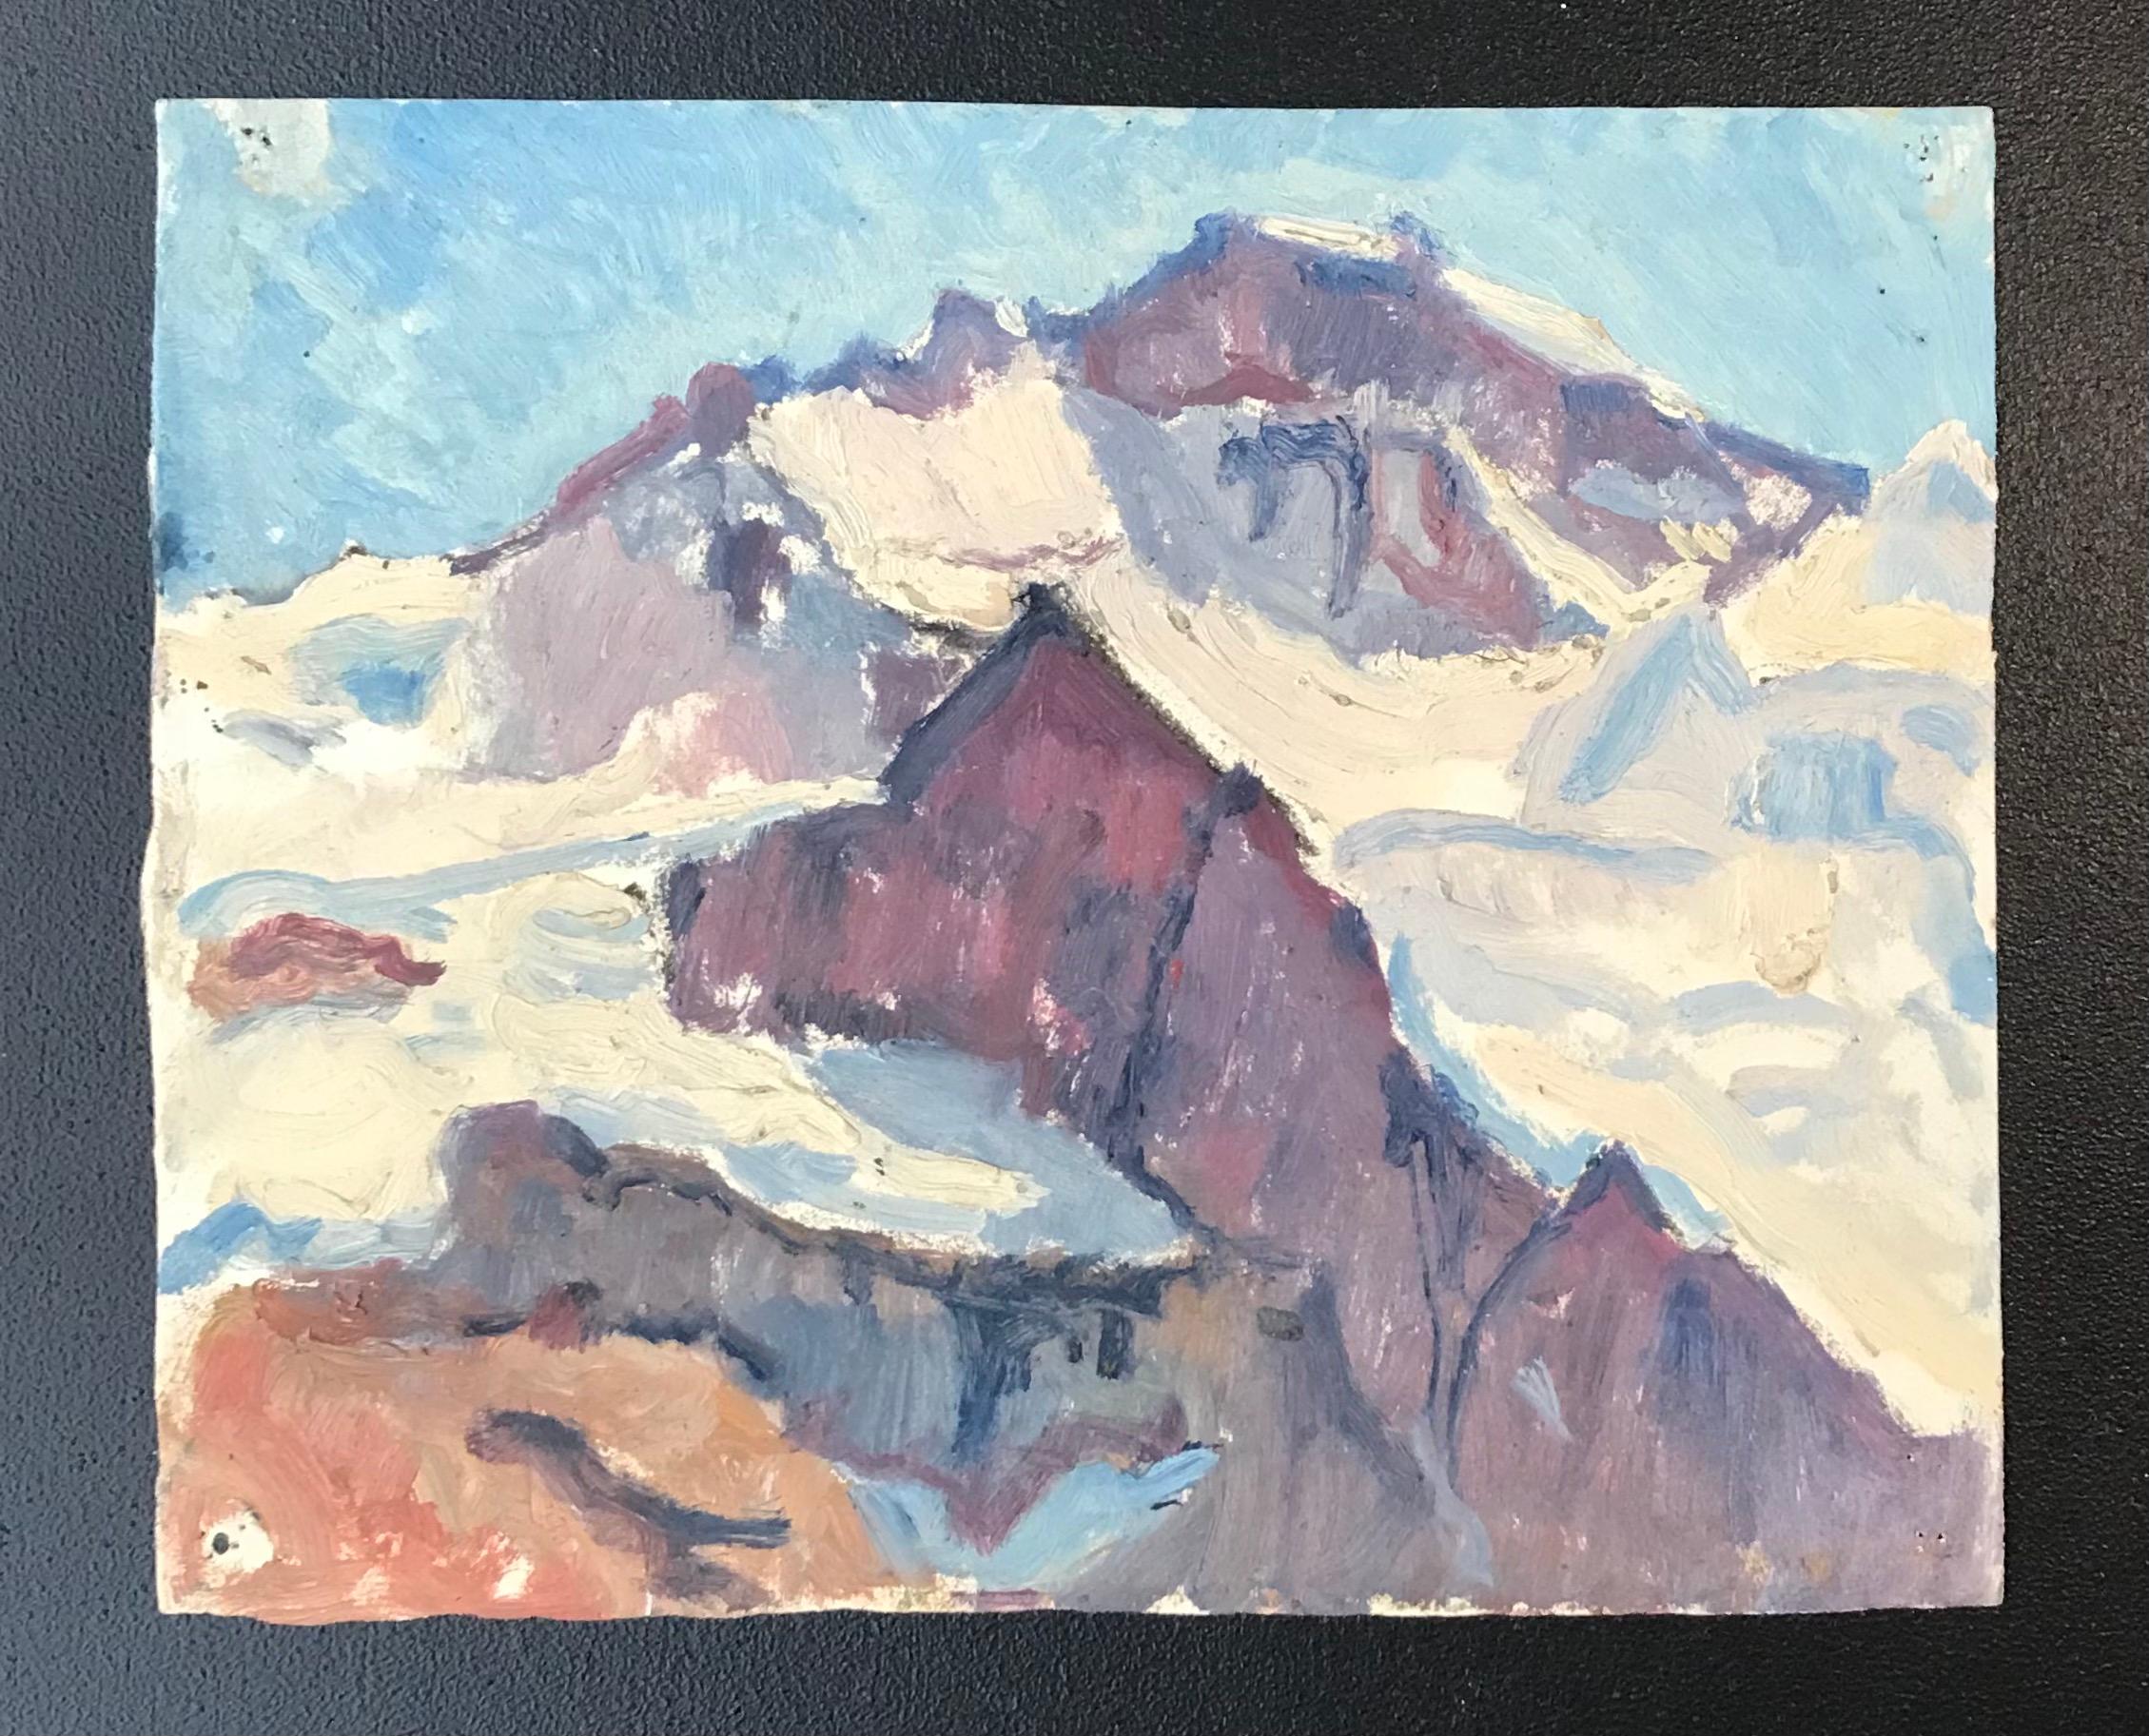 Snowy mountain by I. Ch. Goetz - Watercolor on paper 18x22 cm - Painting by Isaac Charles Goetz